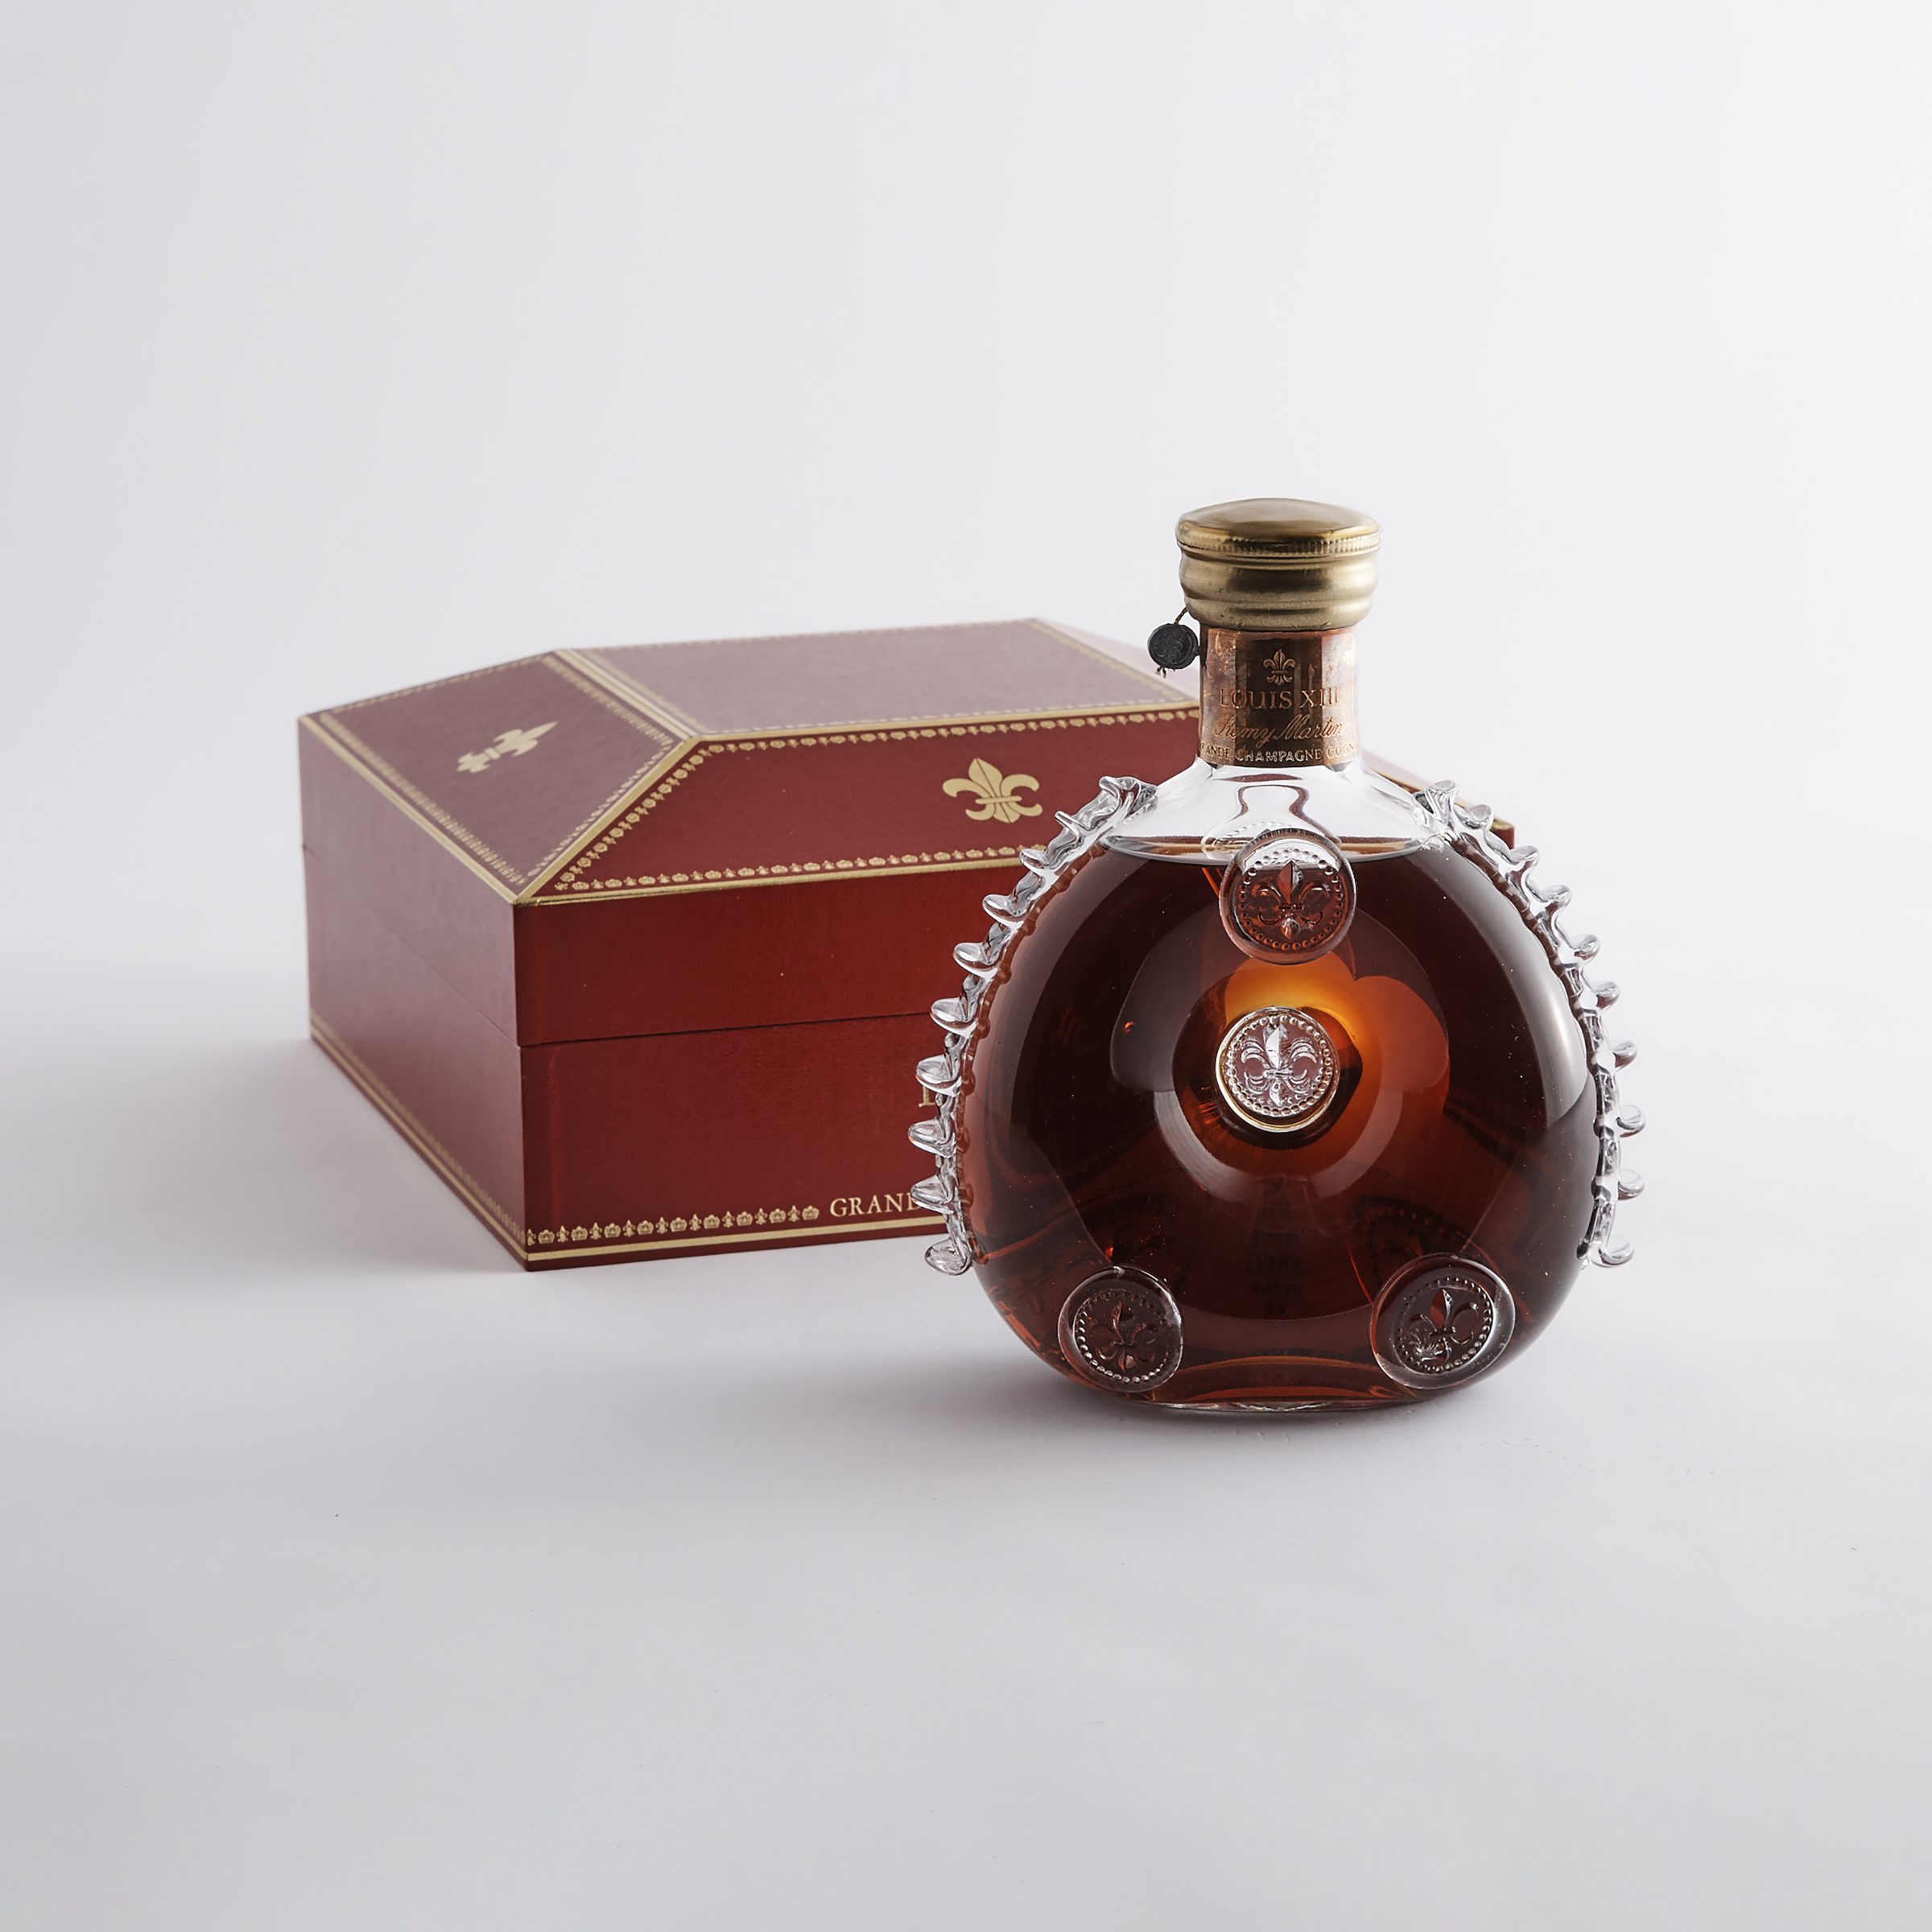 Sold at Auction: Baccarat Remy Martin Louis XIII Cognac Decanter